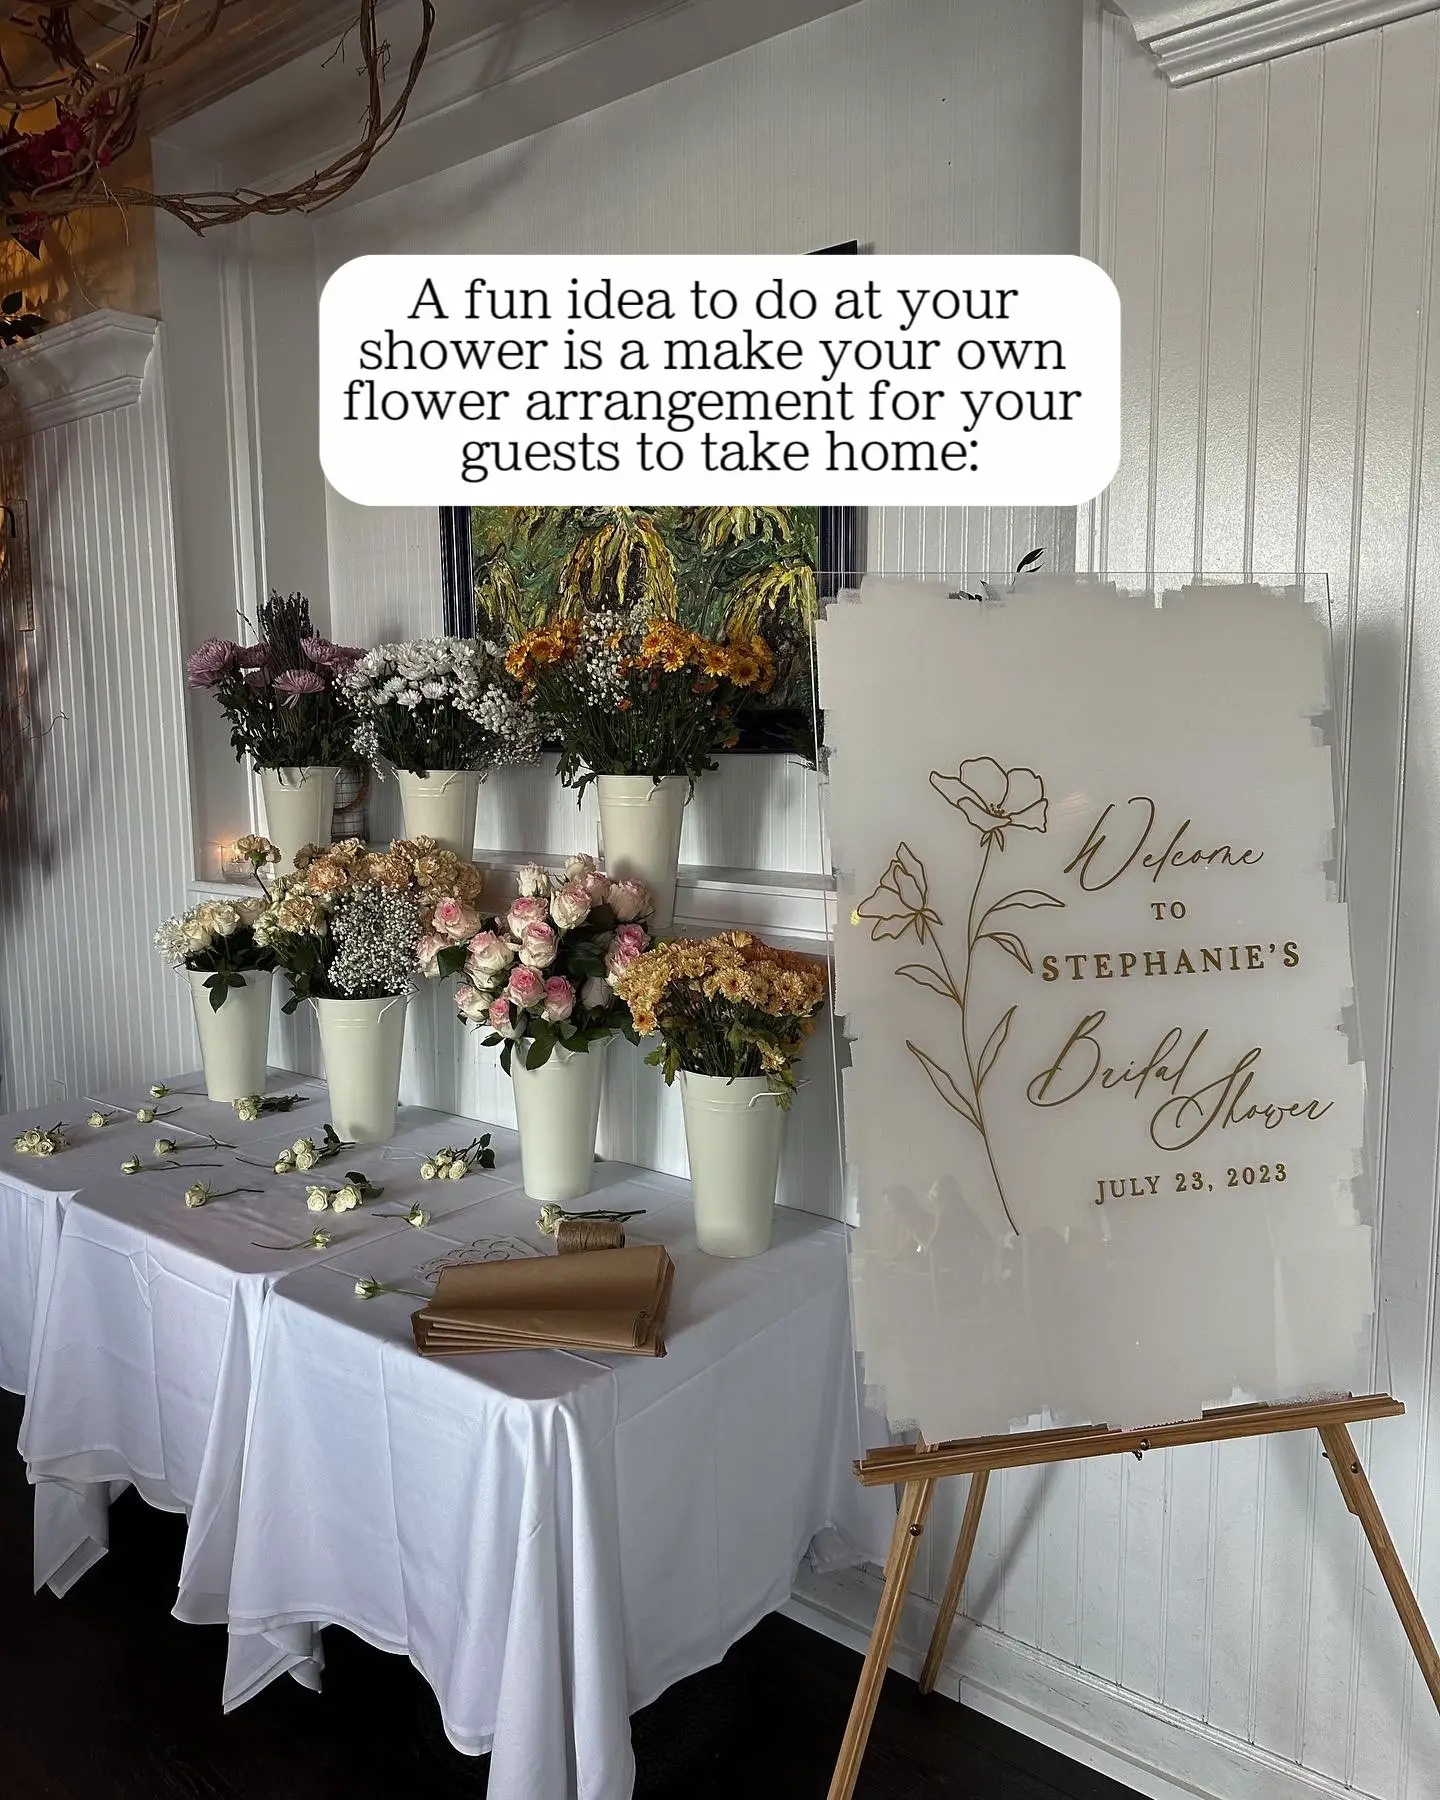 Bridal Shower Decor You Can Reuse On Your Wedding Day - Weddingbells